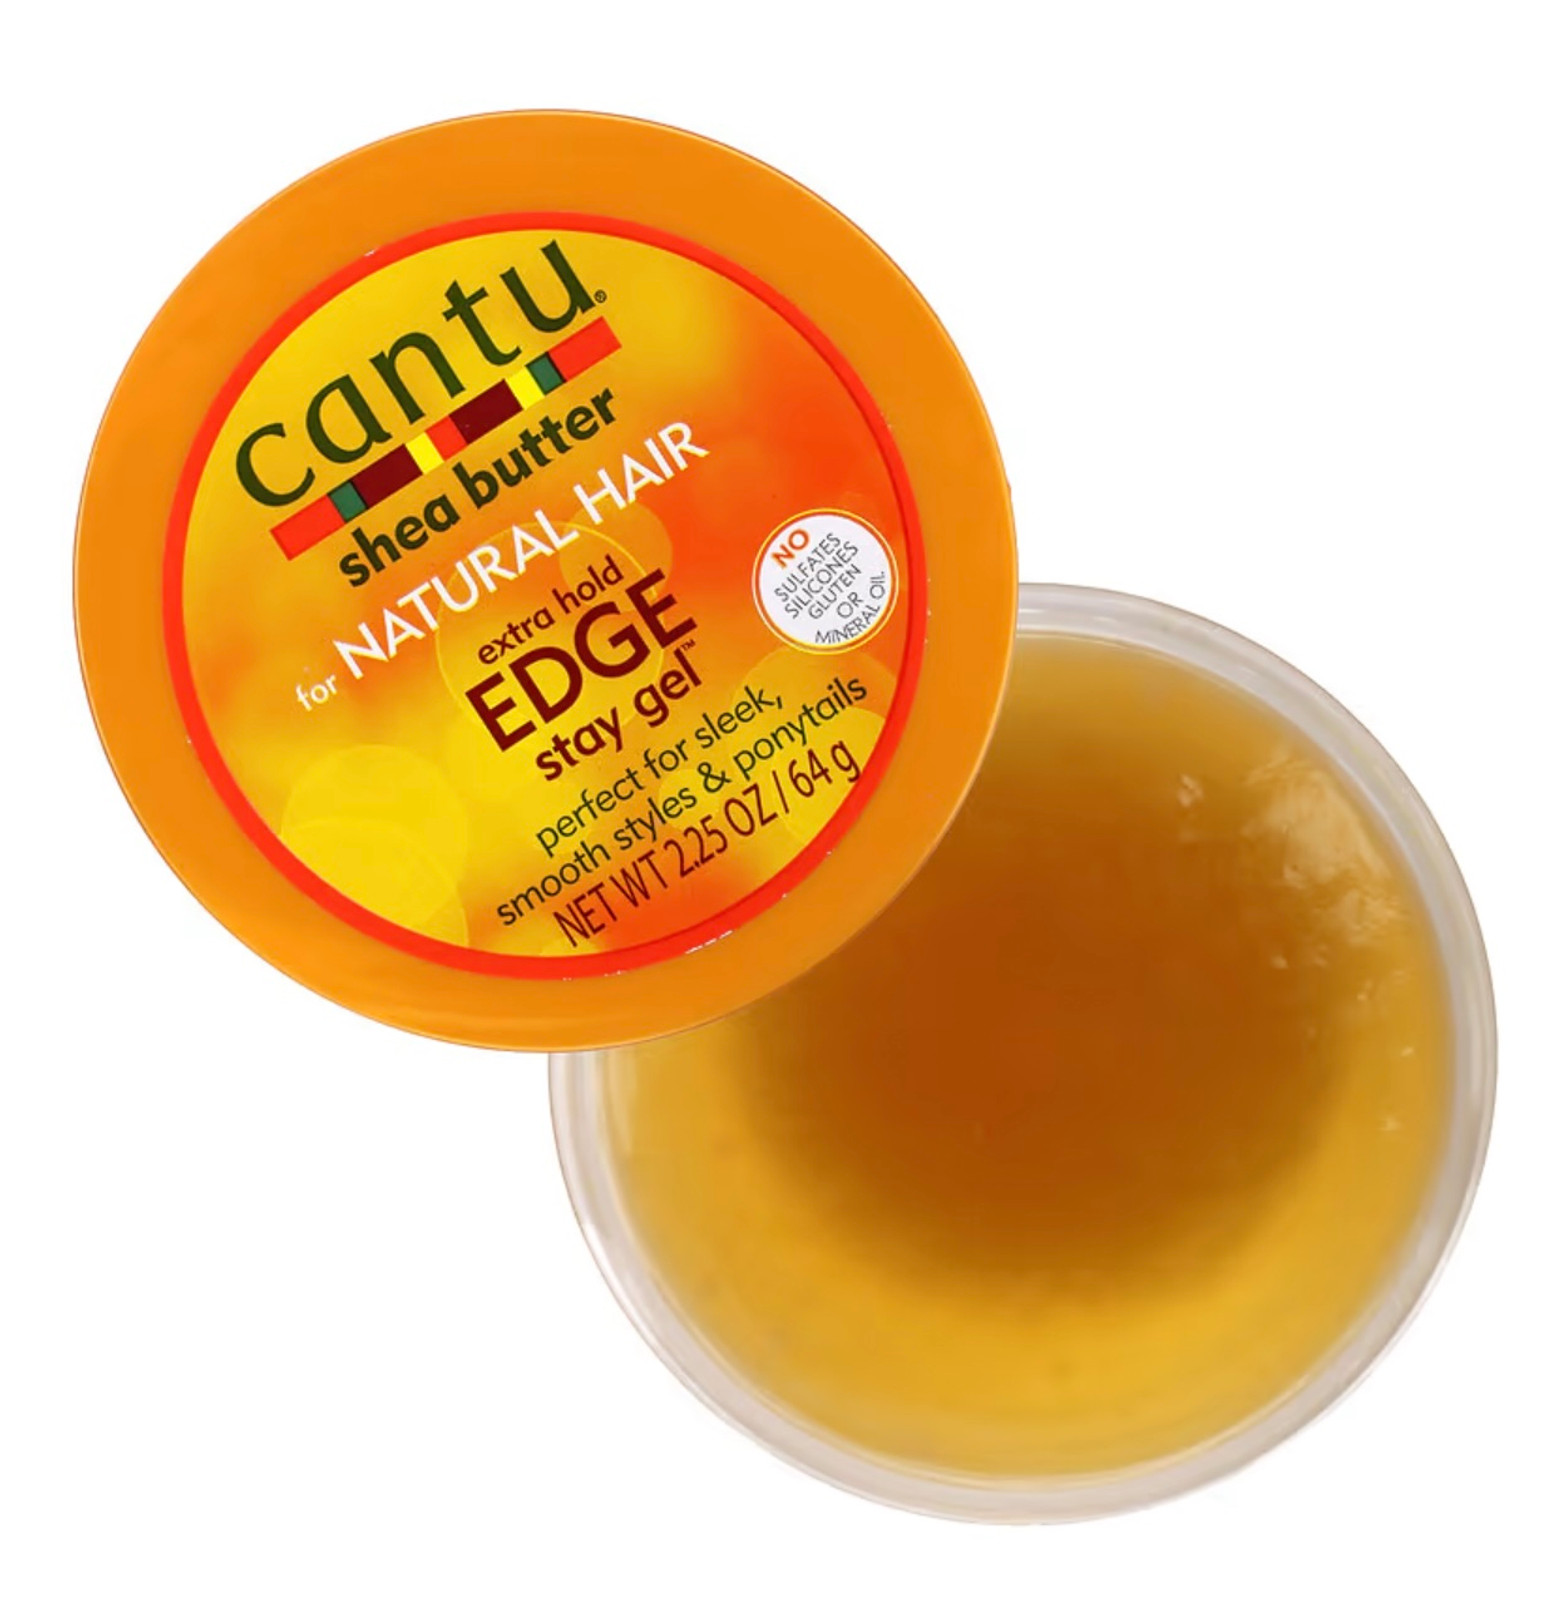 Shea Butter for Natural Extra Hold Edge Stay Gel